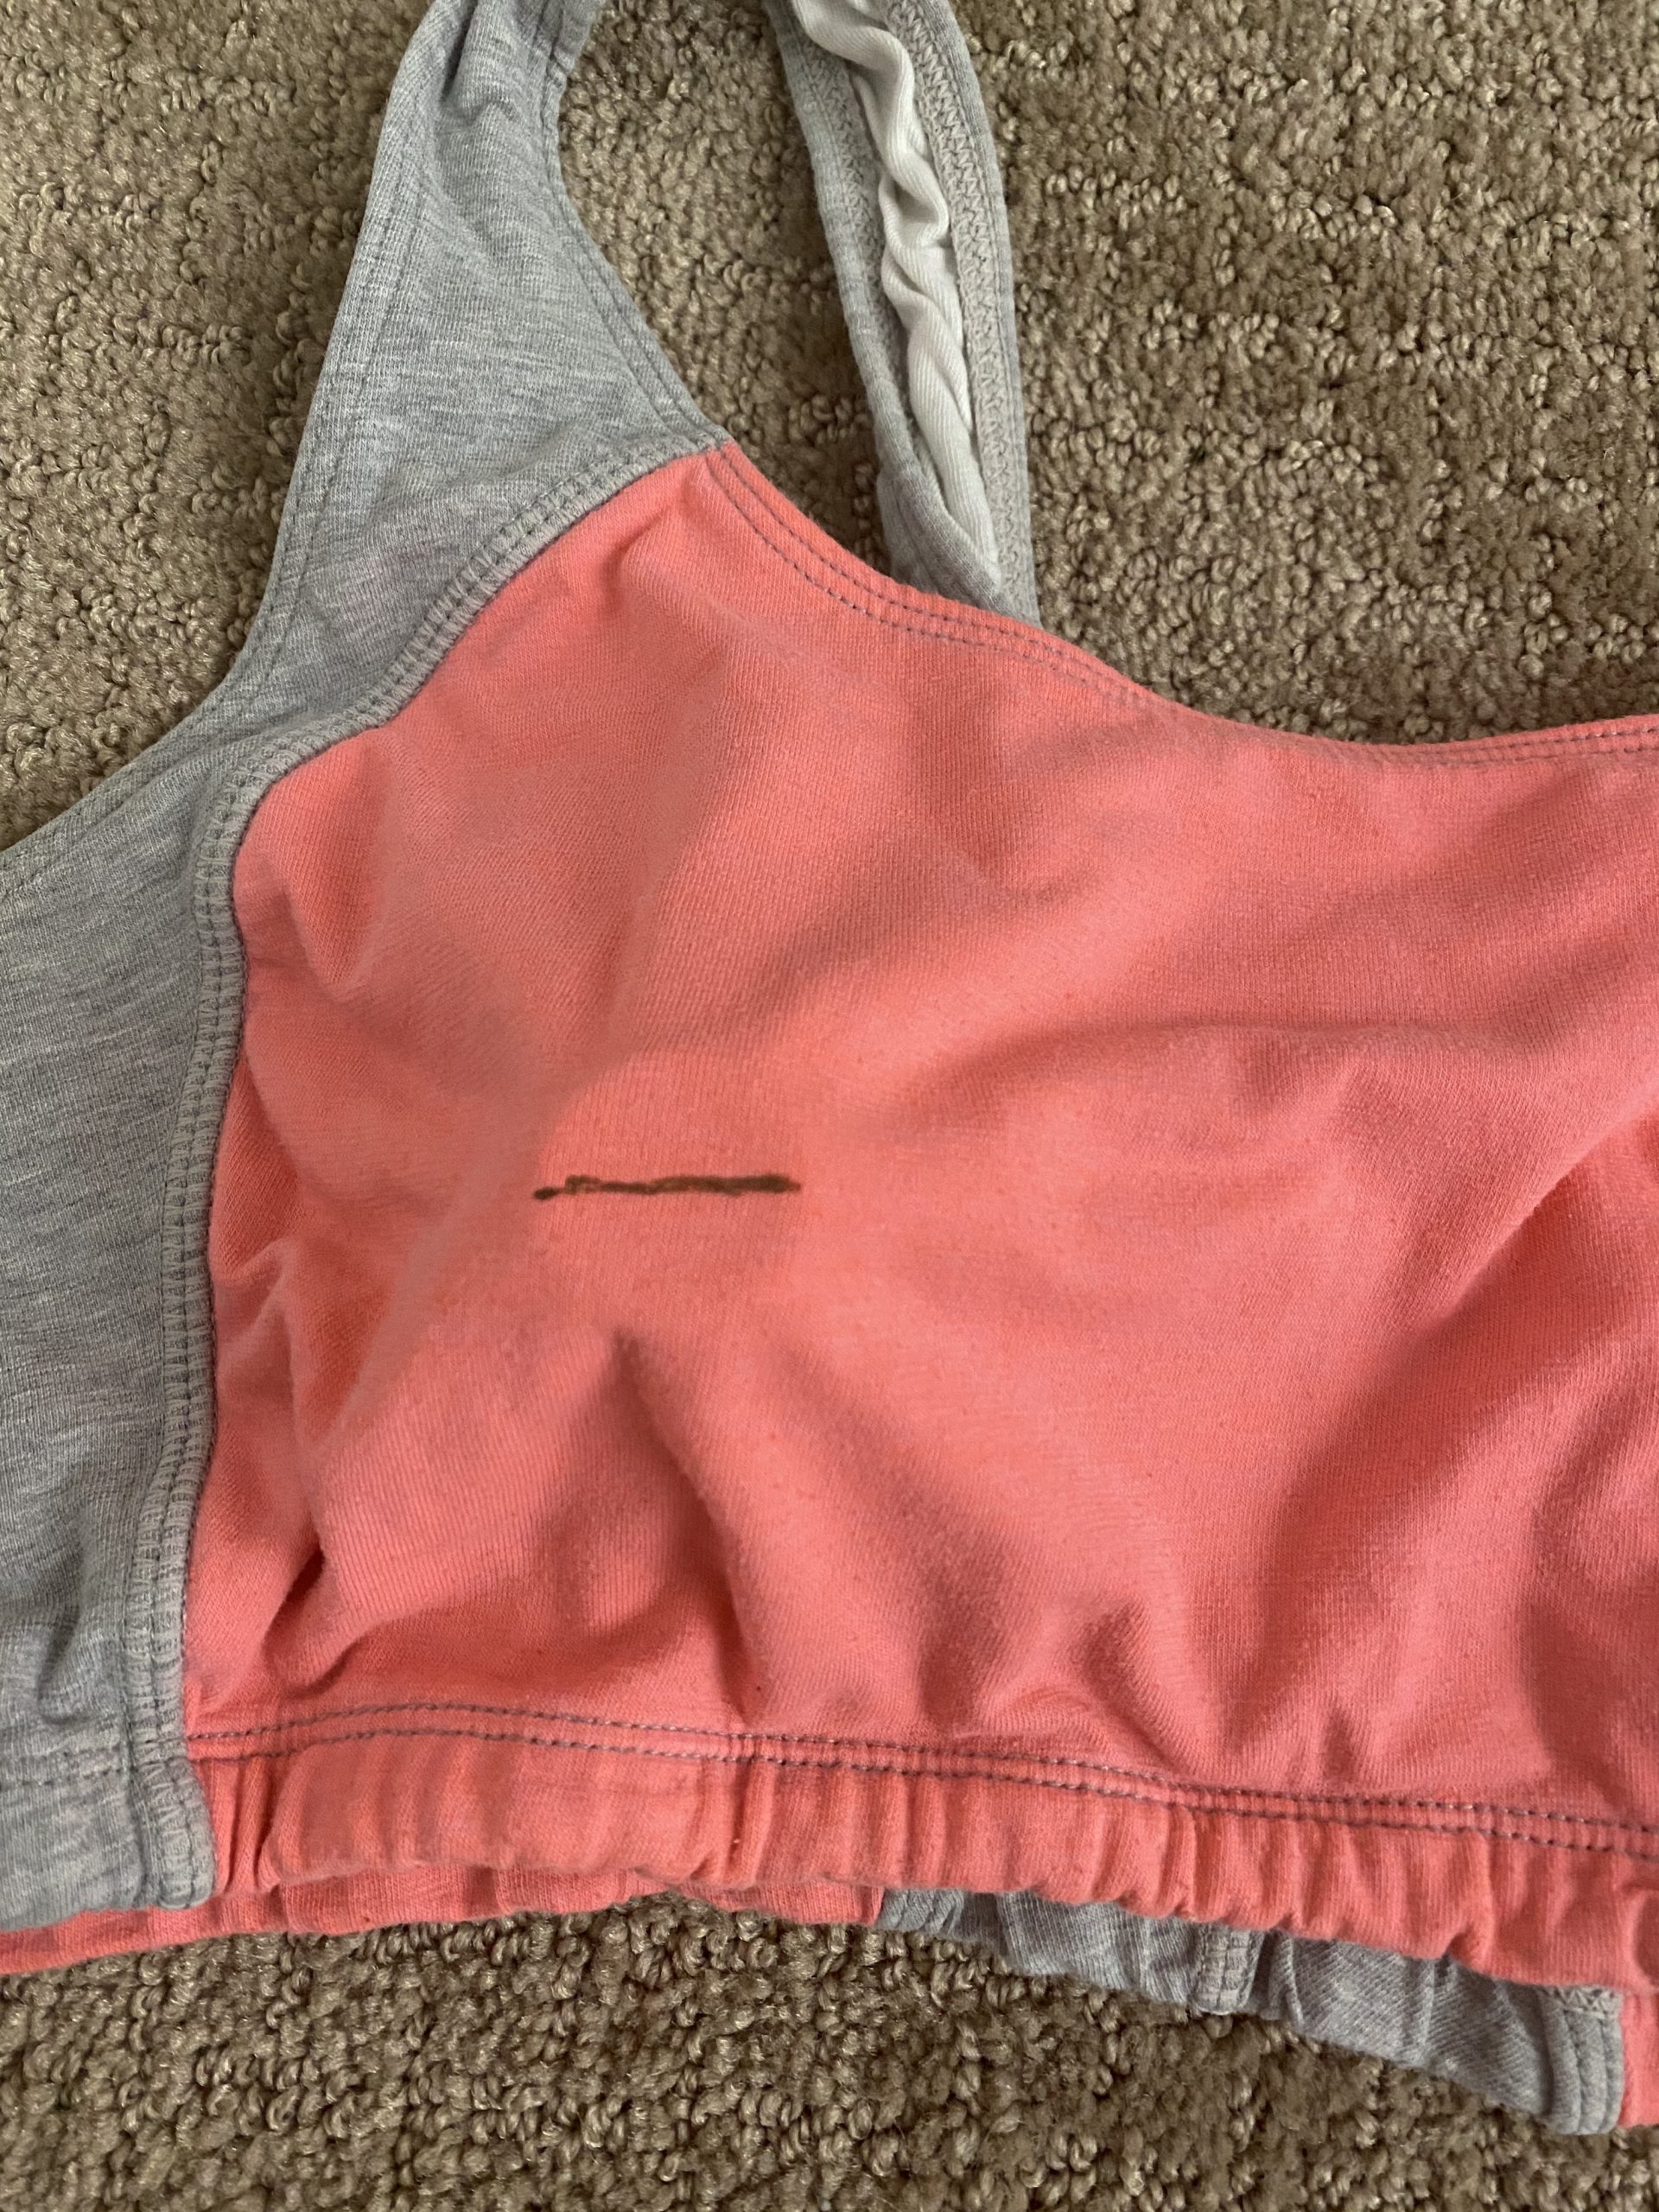 line drawn on top of sports bra to show where to cut